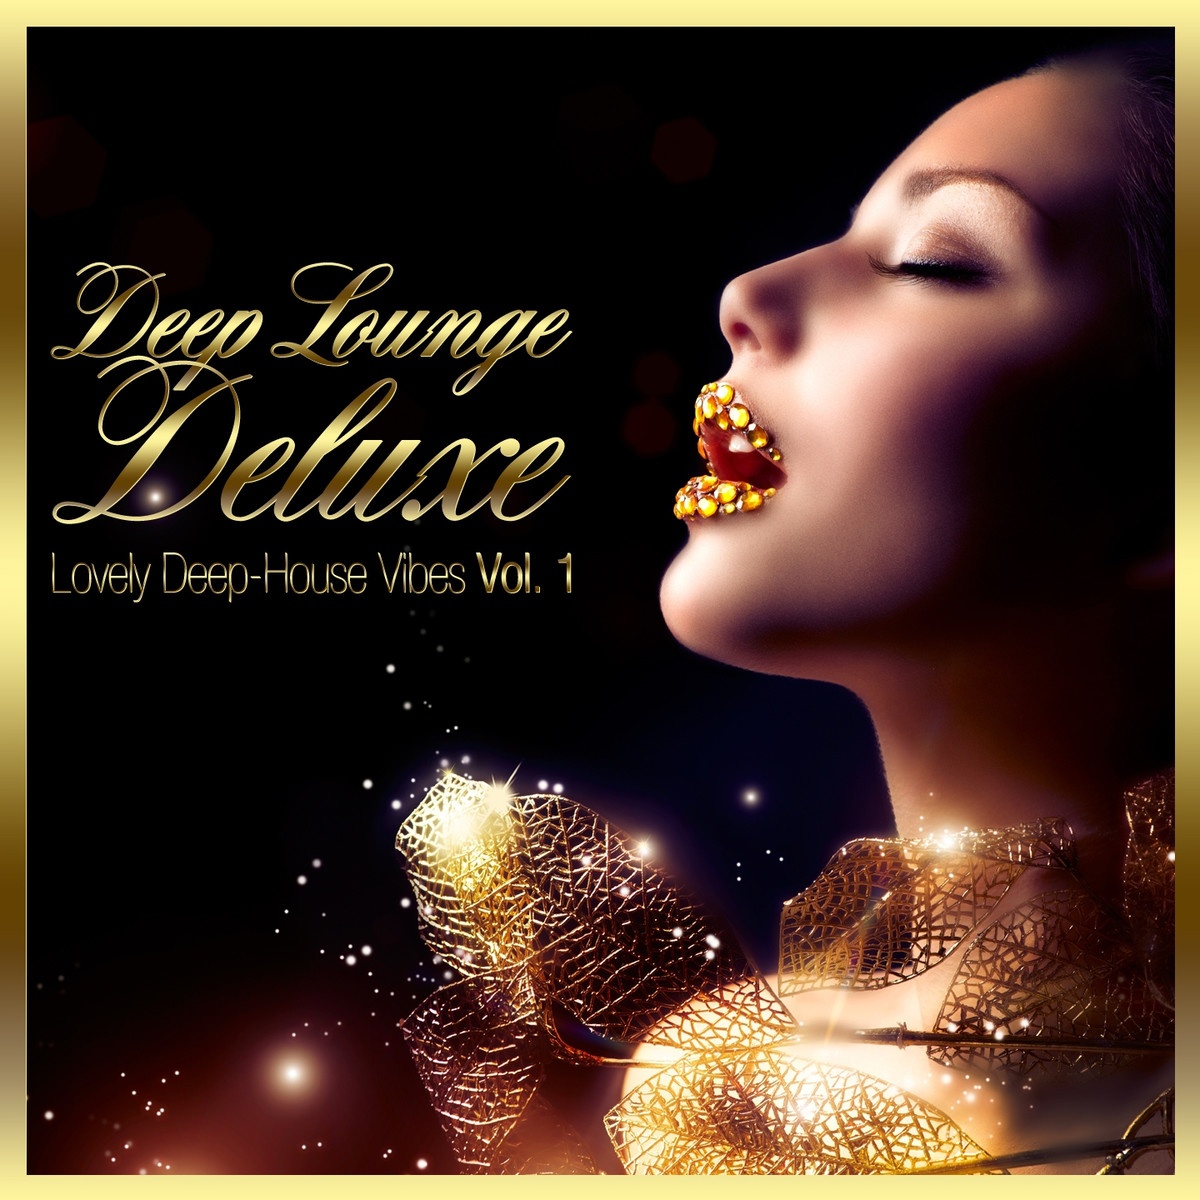 Deep Lounge Deluxe, Vol. 1 (Lovely Deep-House Vibes)